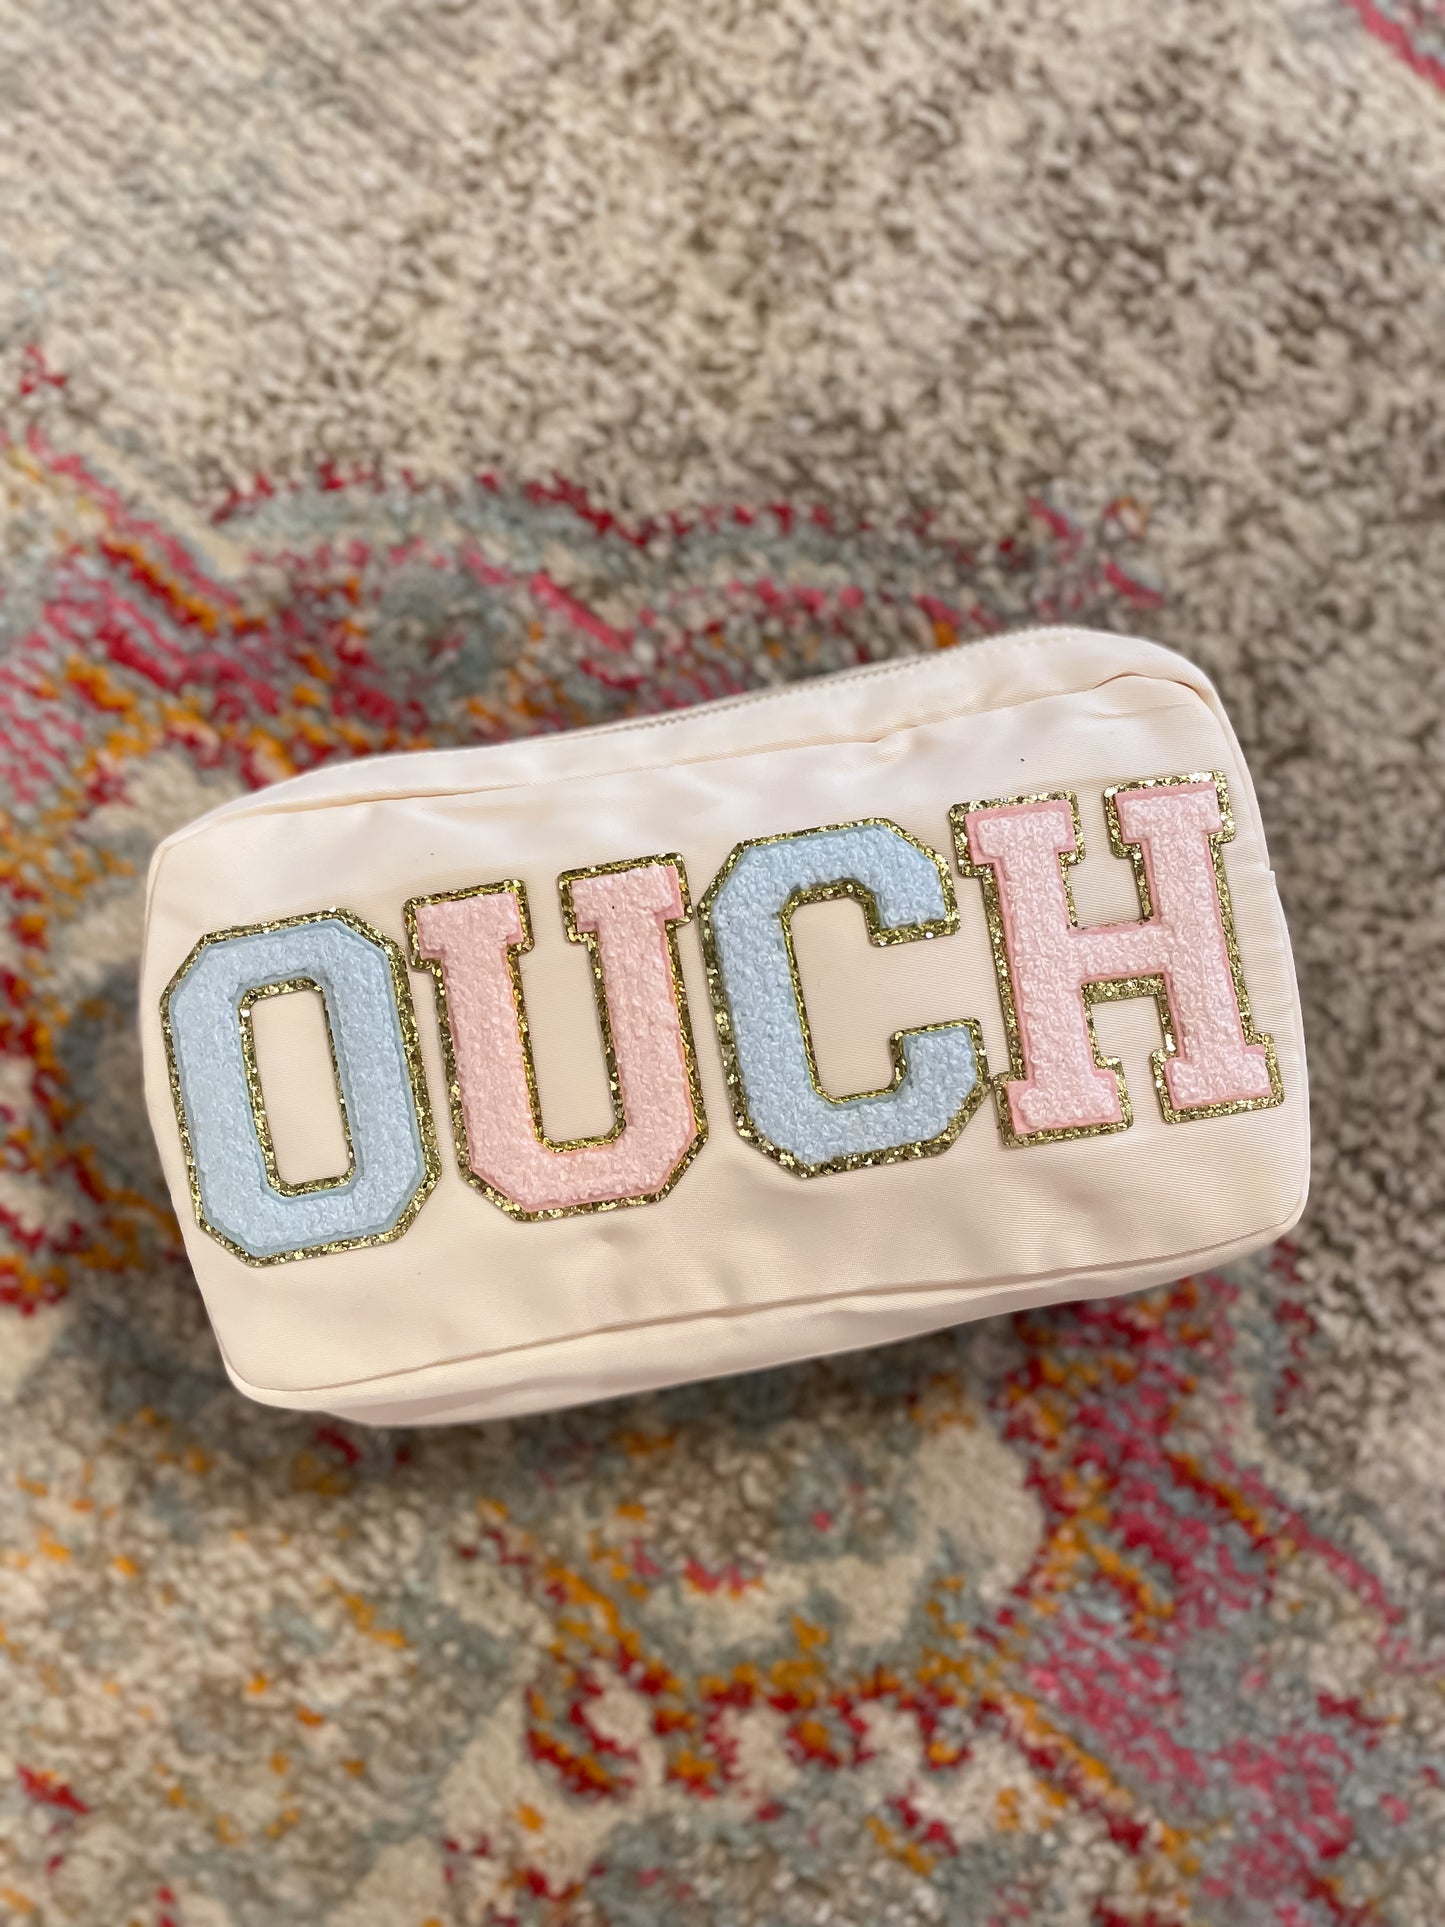 Cream OUCH Pouch Bag